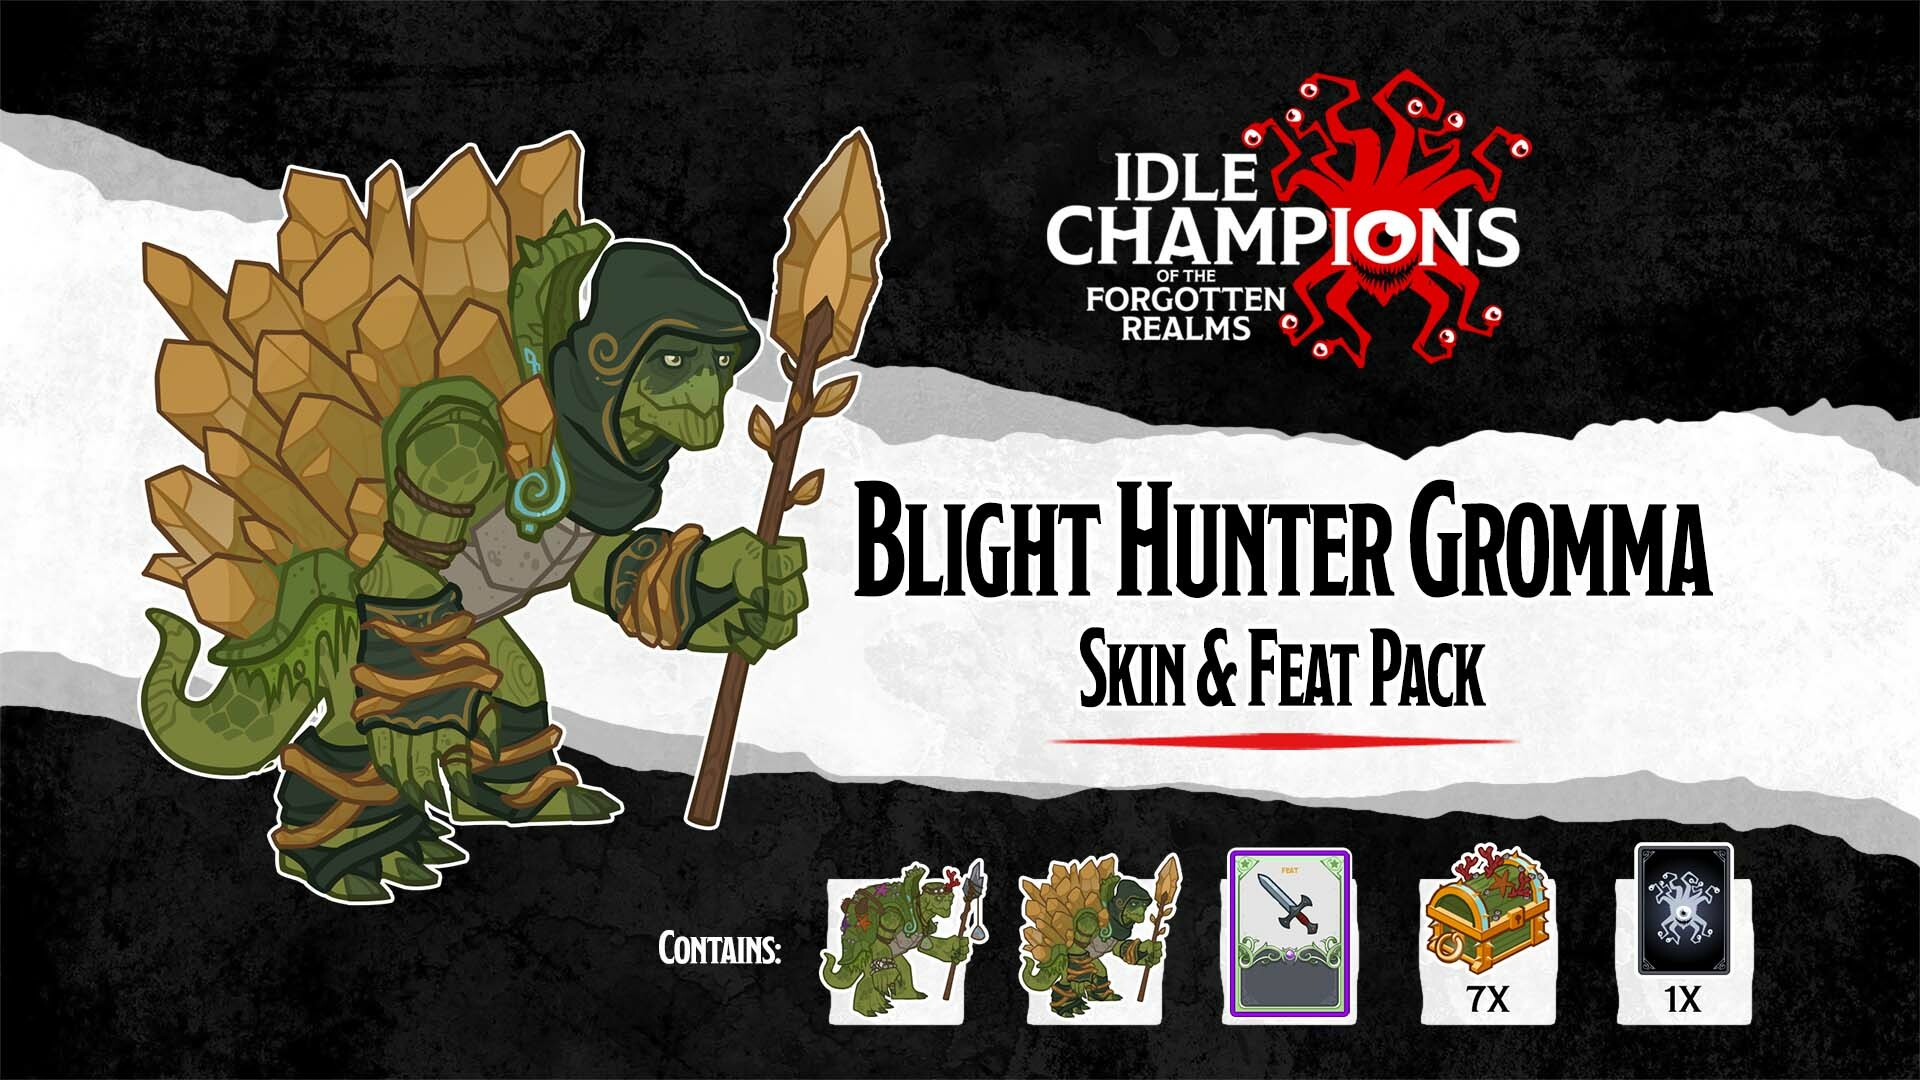 Idle Champions - Blight Hunter Gromma Skin & Feat Pack Featured Screenshot #1